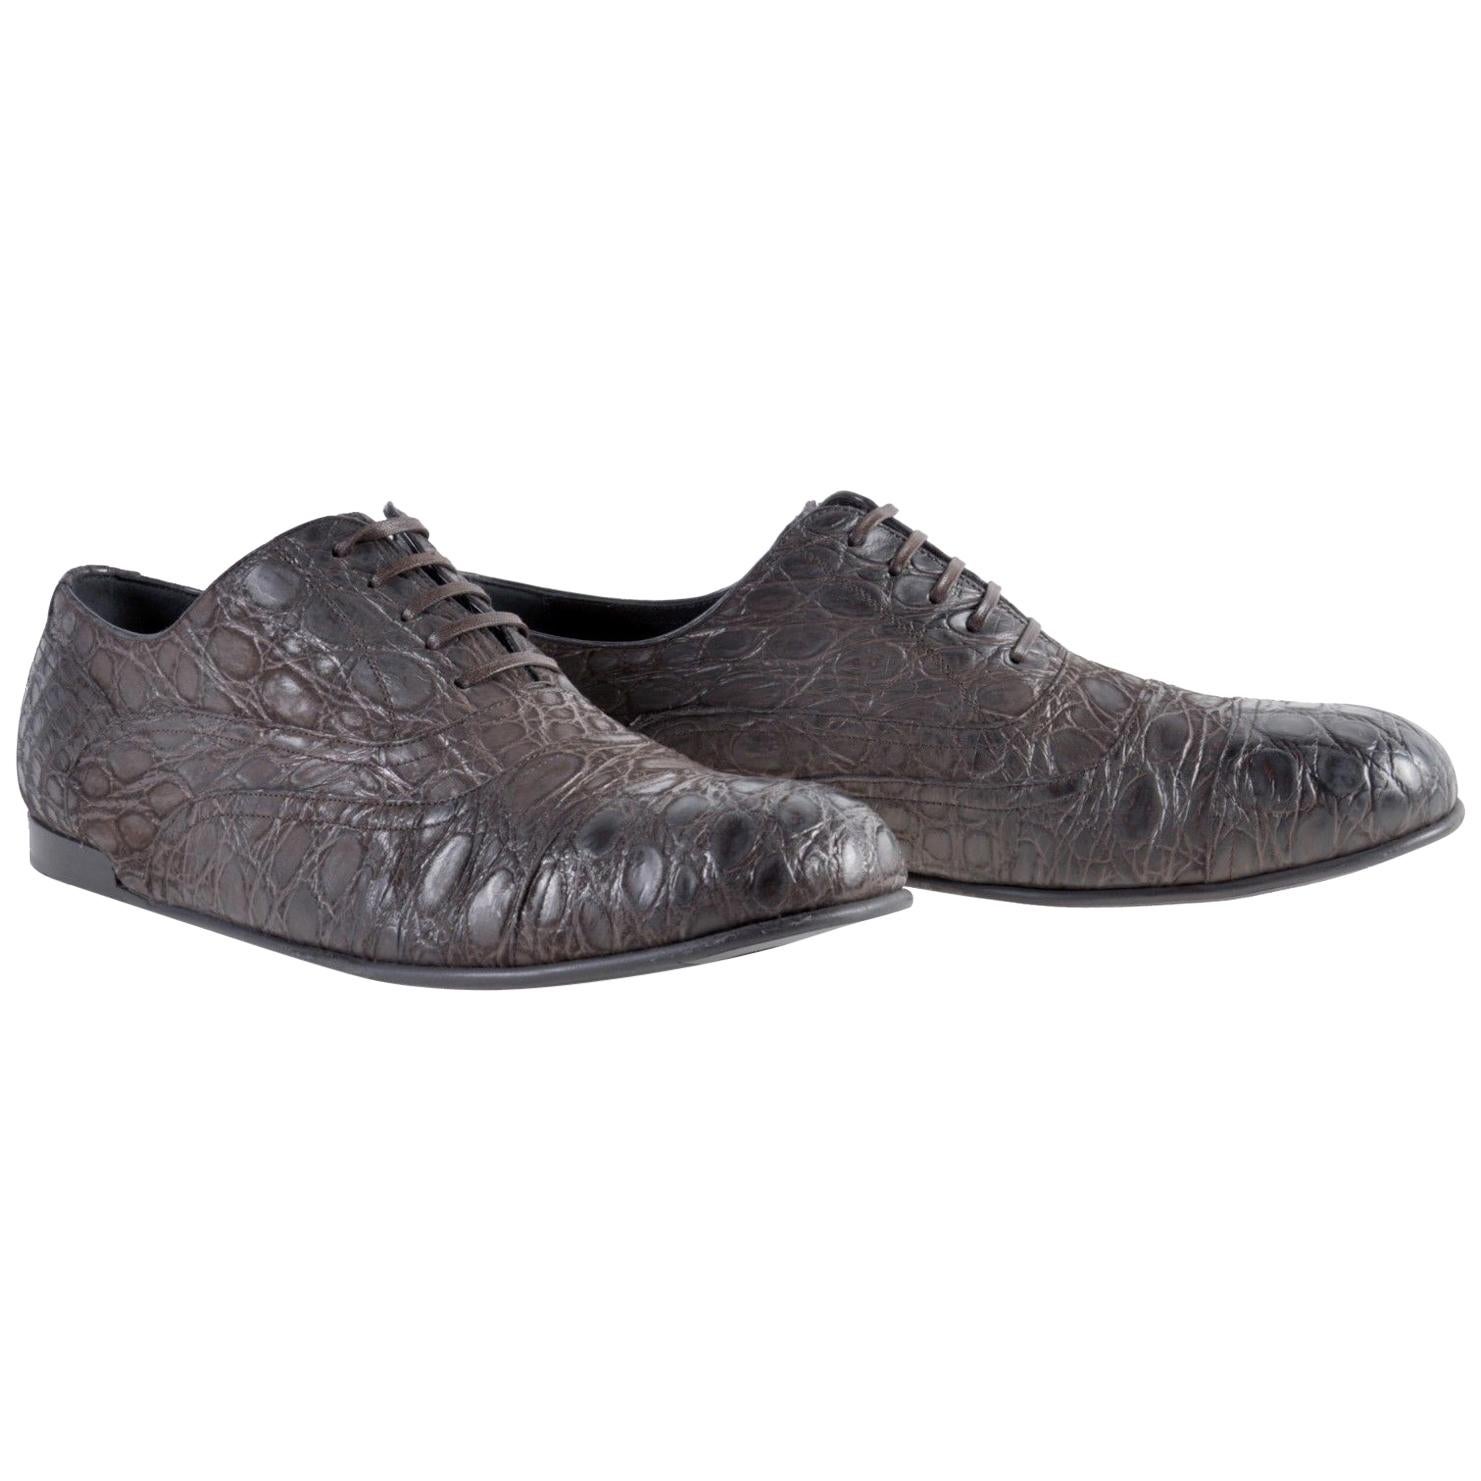 NEW DOLCE & GABBANA BROWN CROCODILE LEATHER SHOES for MEN 43 - US 10